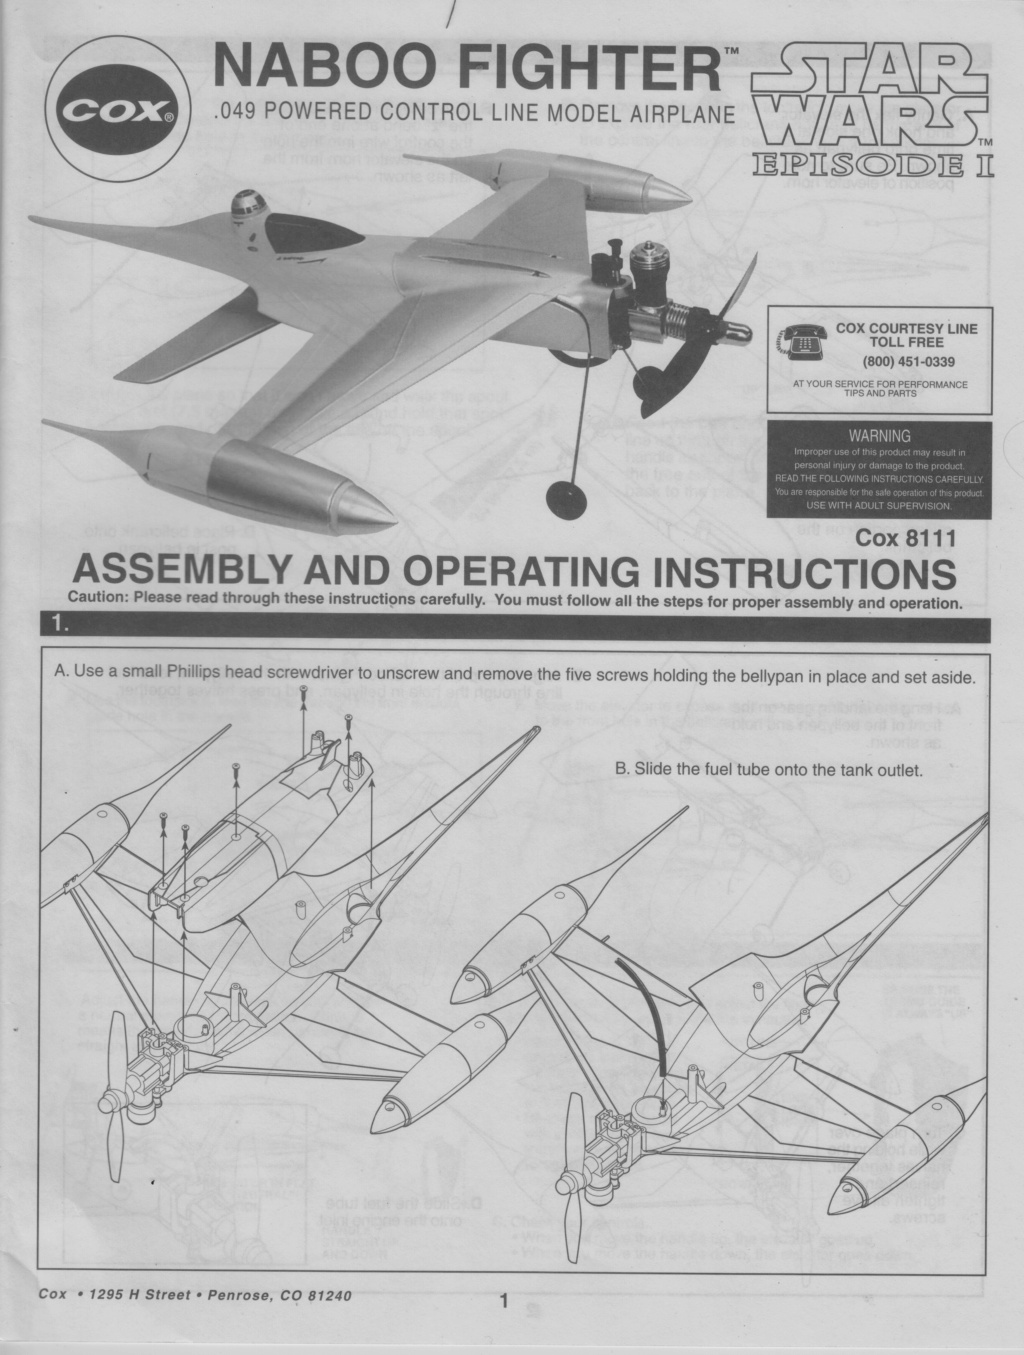 Naboo Fighter pictures and manual scans. Naboo_12